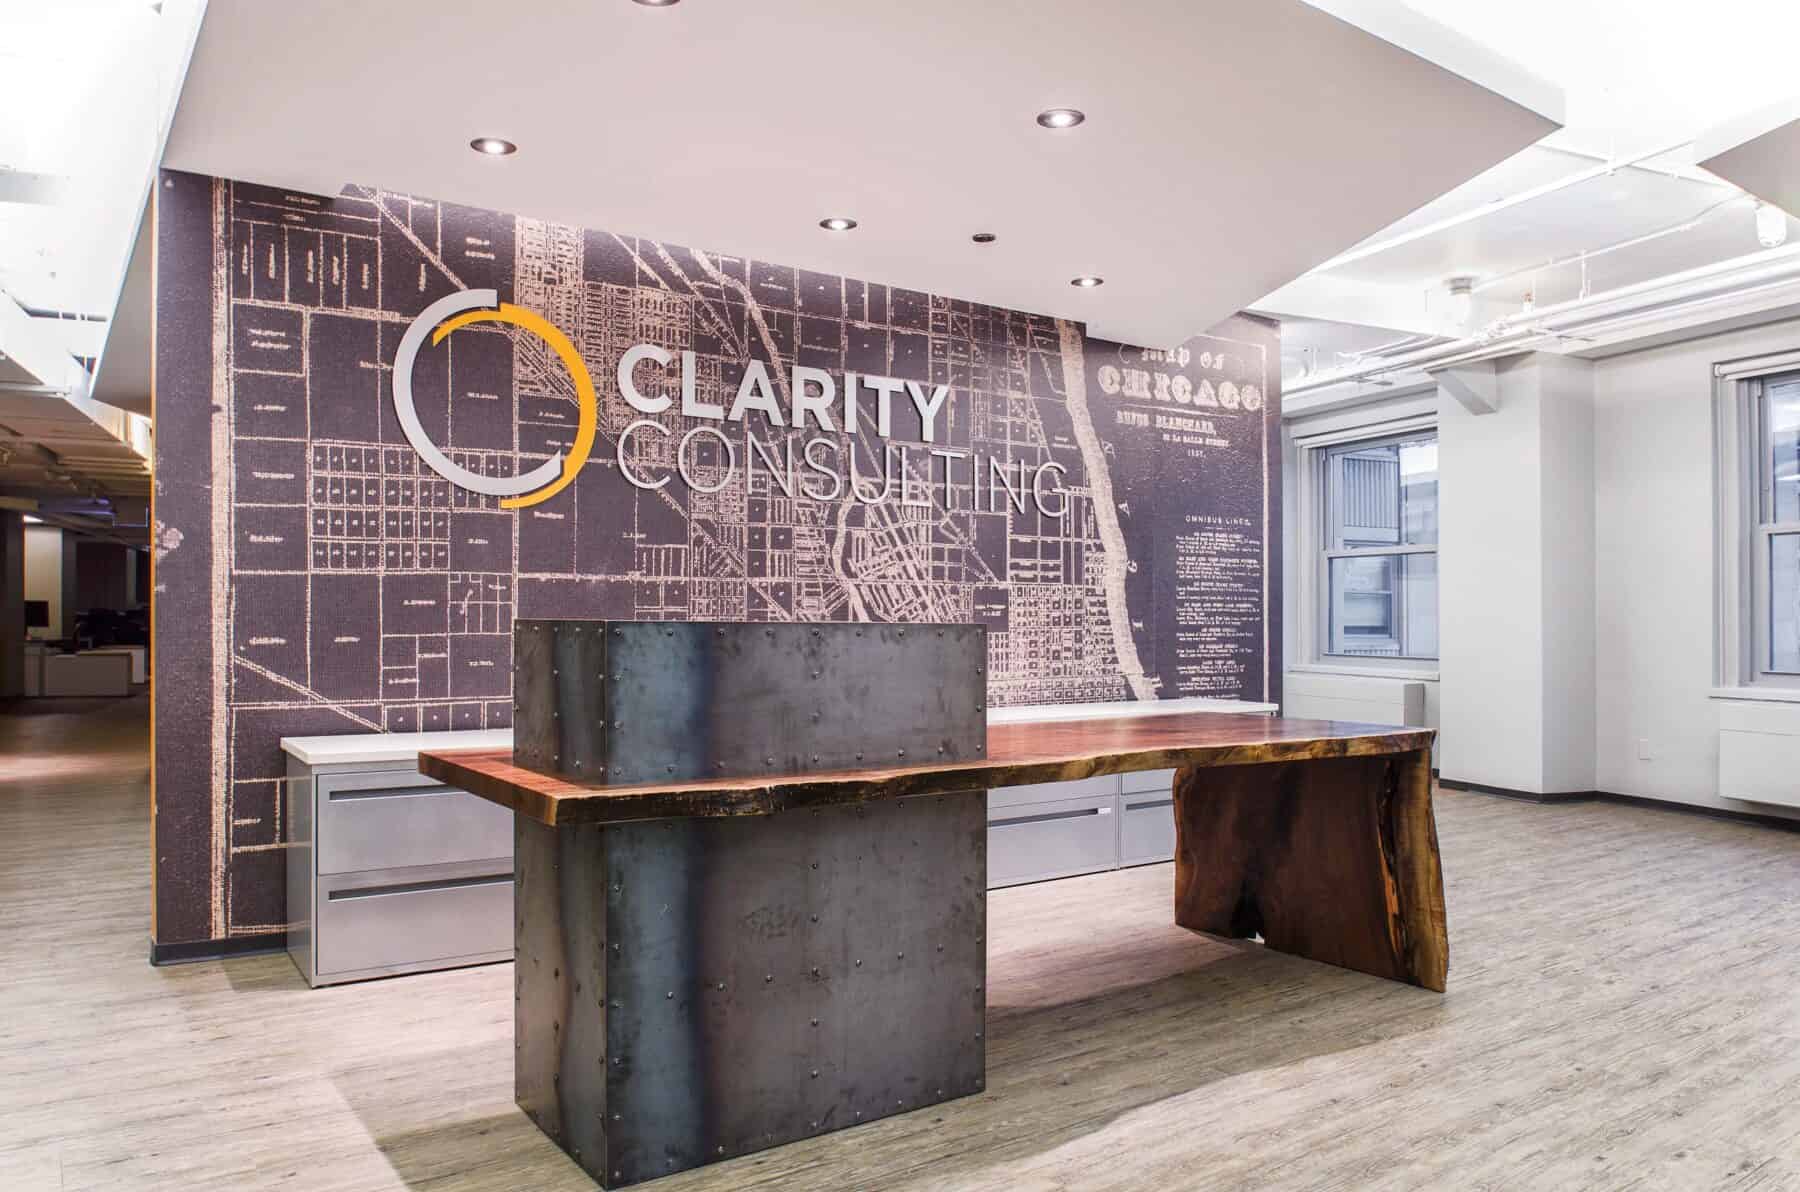 Custom Fabrication of Architectural Distressed Metalwork with Rivets and Walnut Reception Desk from Construction Specialty Projects by Commercial Builder & General Contractor Structural Enterprises